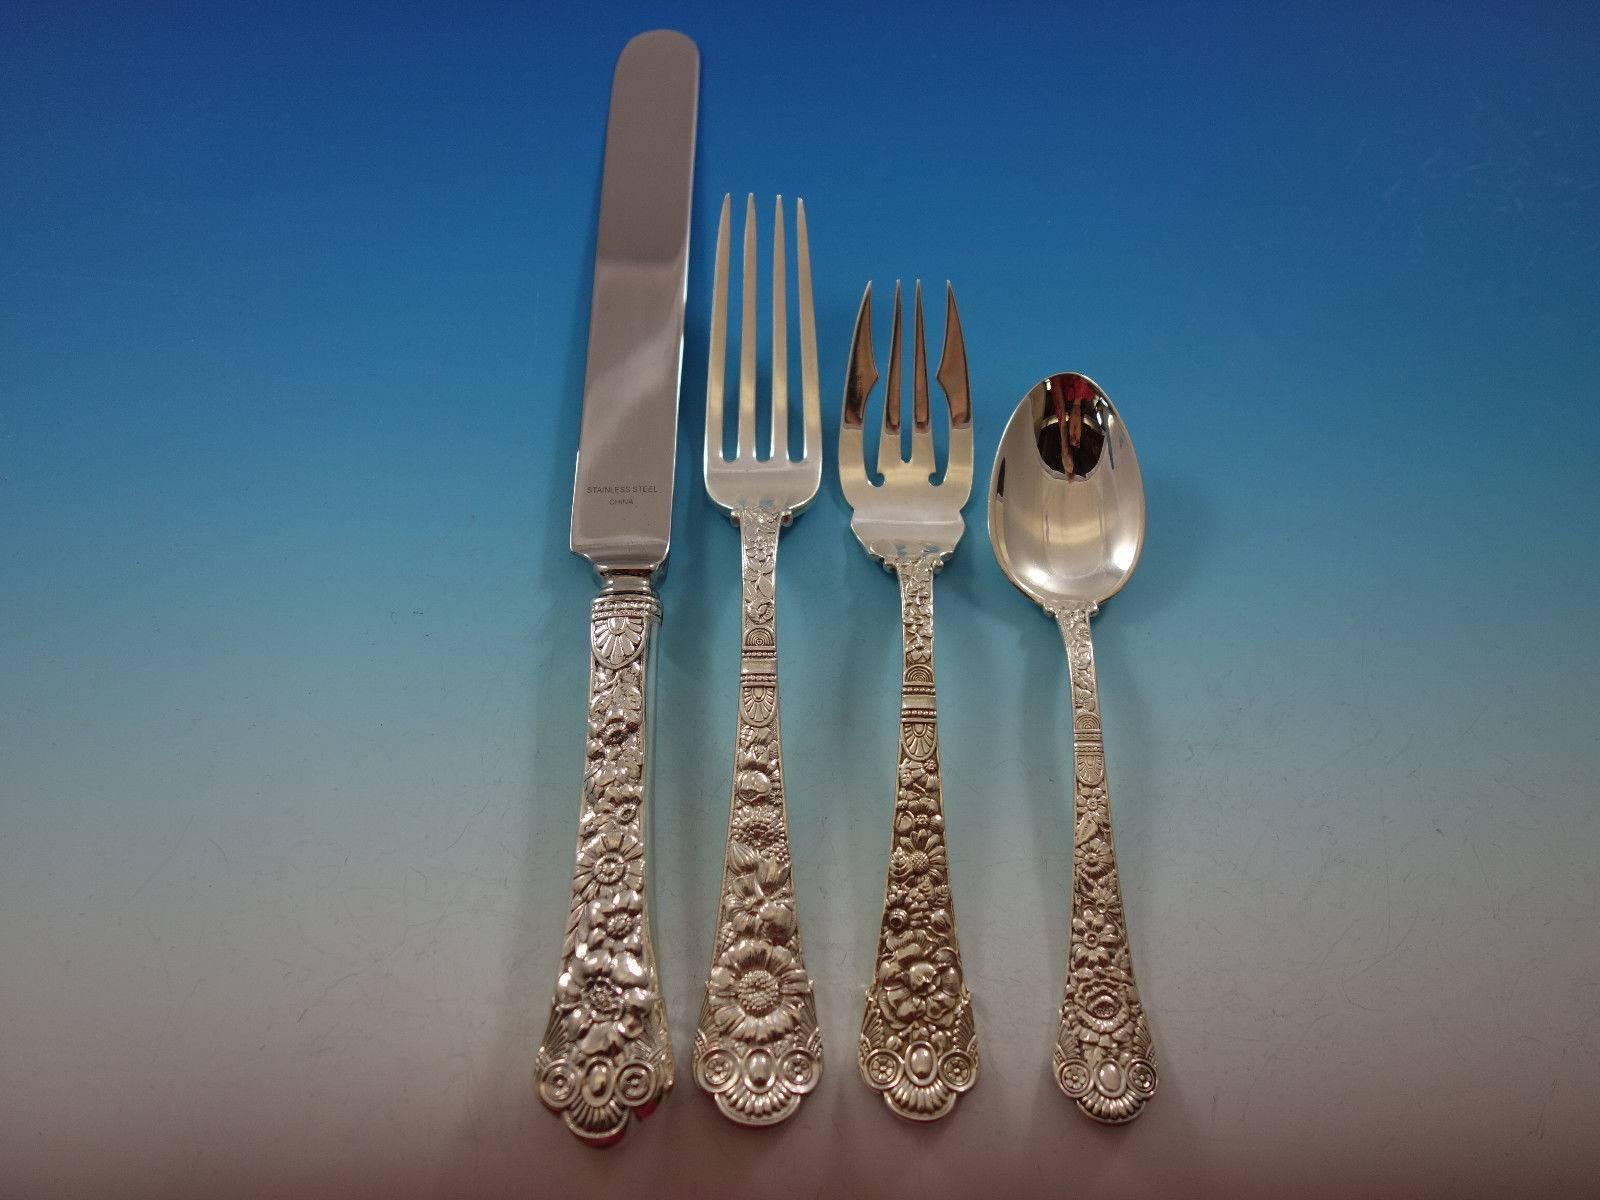 Cluny by Gorham sterling silver flatware set, 153 pieces. This set includes: 

12 dinner size knives, 10 1/4